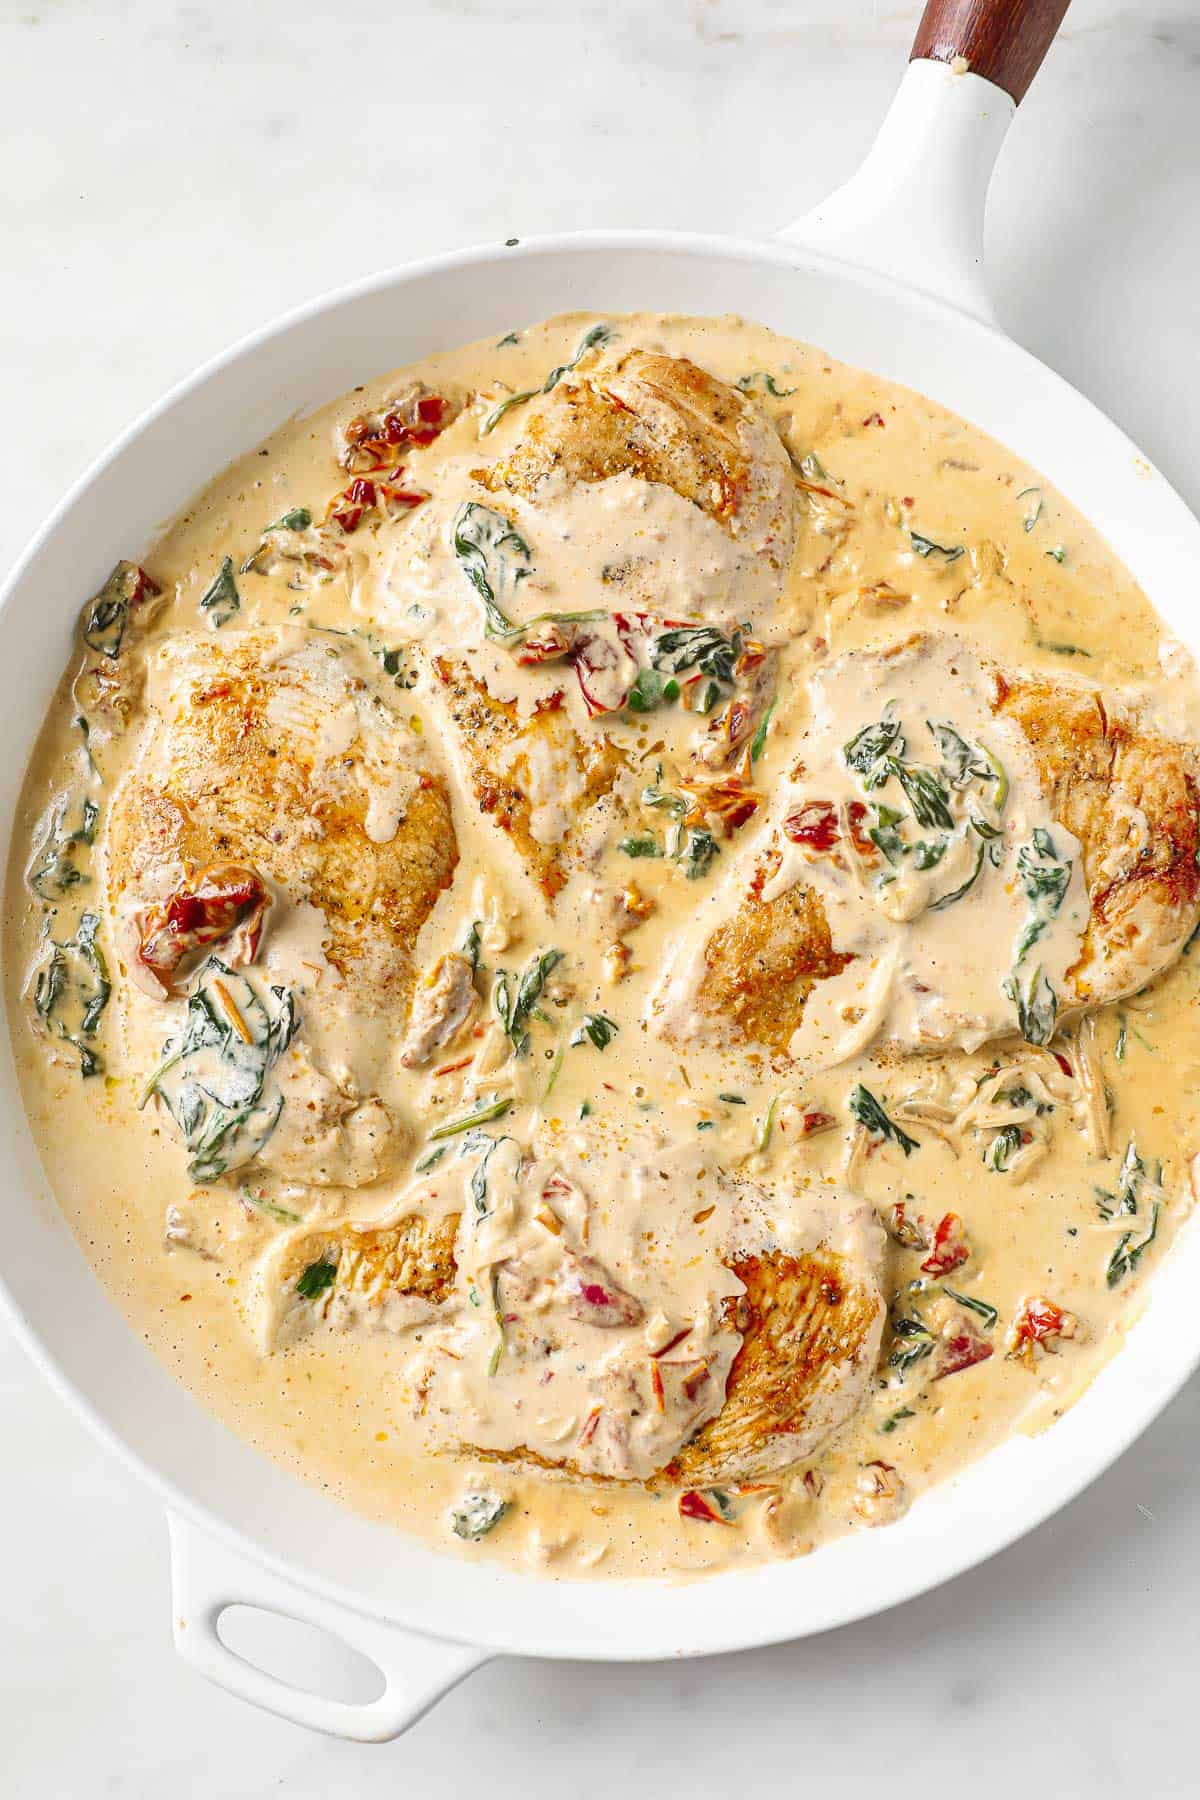 A white skillet filled with a chicken dish with a creamy tomato sauce, spinach and sun-dried tomatoes.